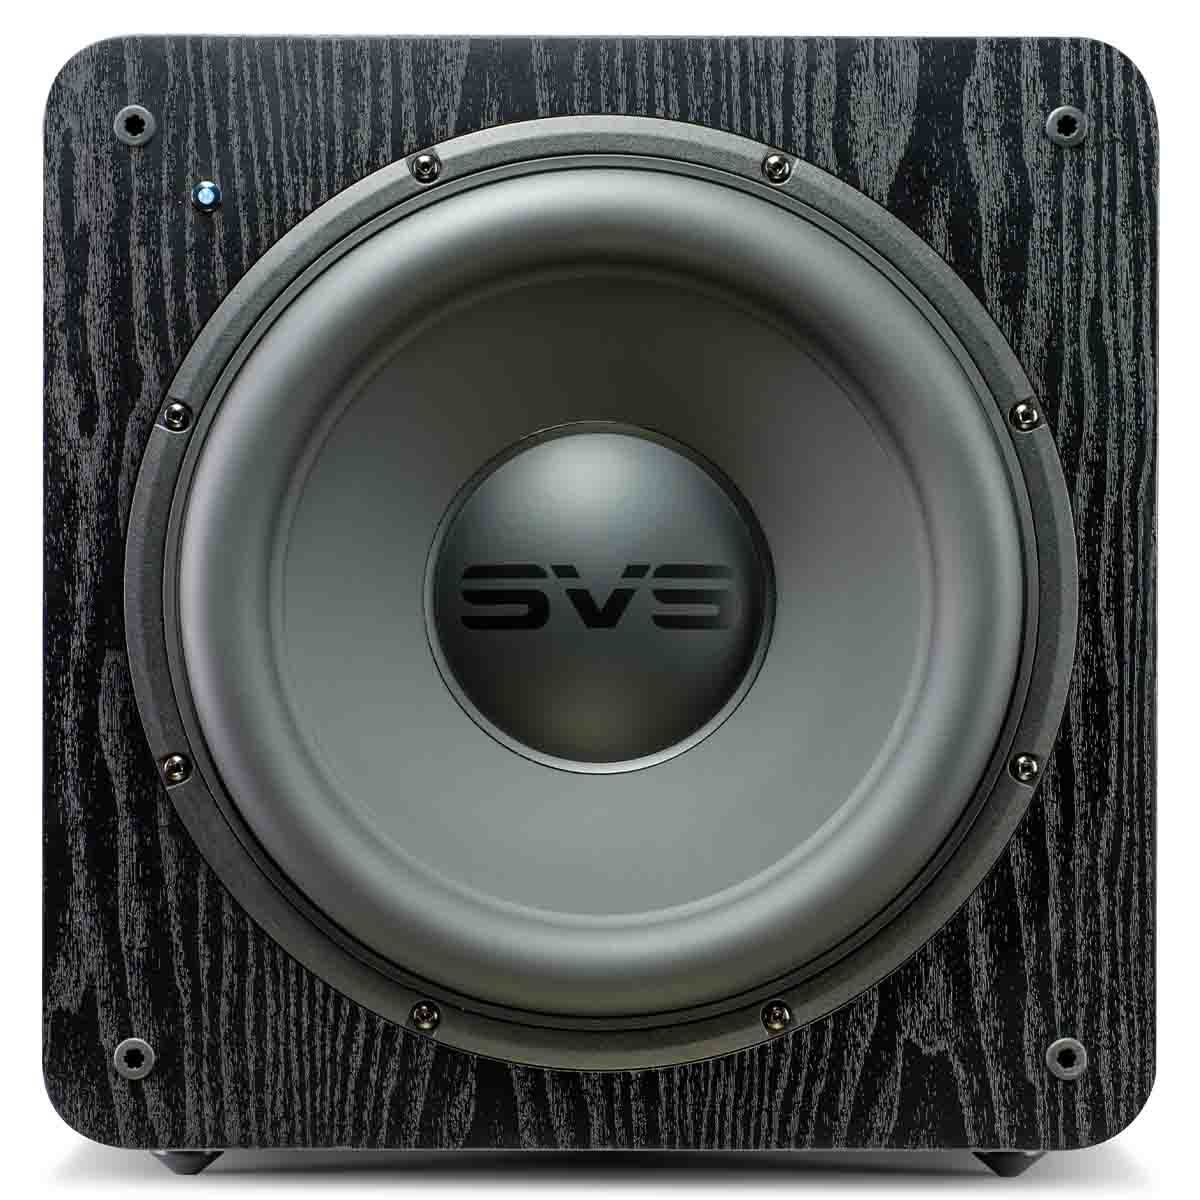 SVS SB-2000 12" Compact Sealed Subwoofer - Premium Black Ash - front view without grille